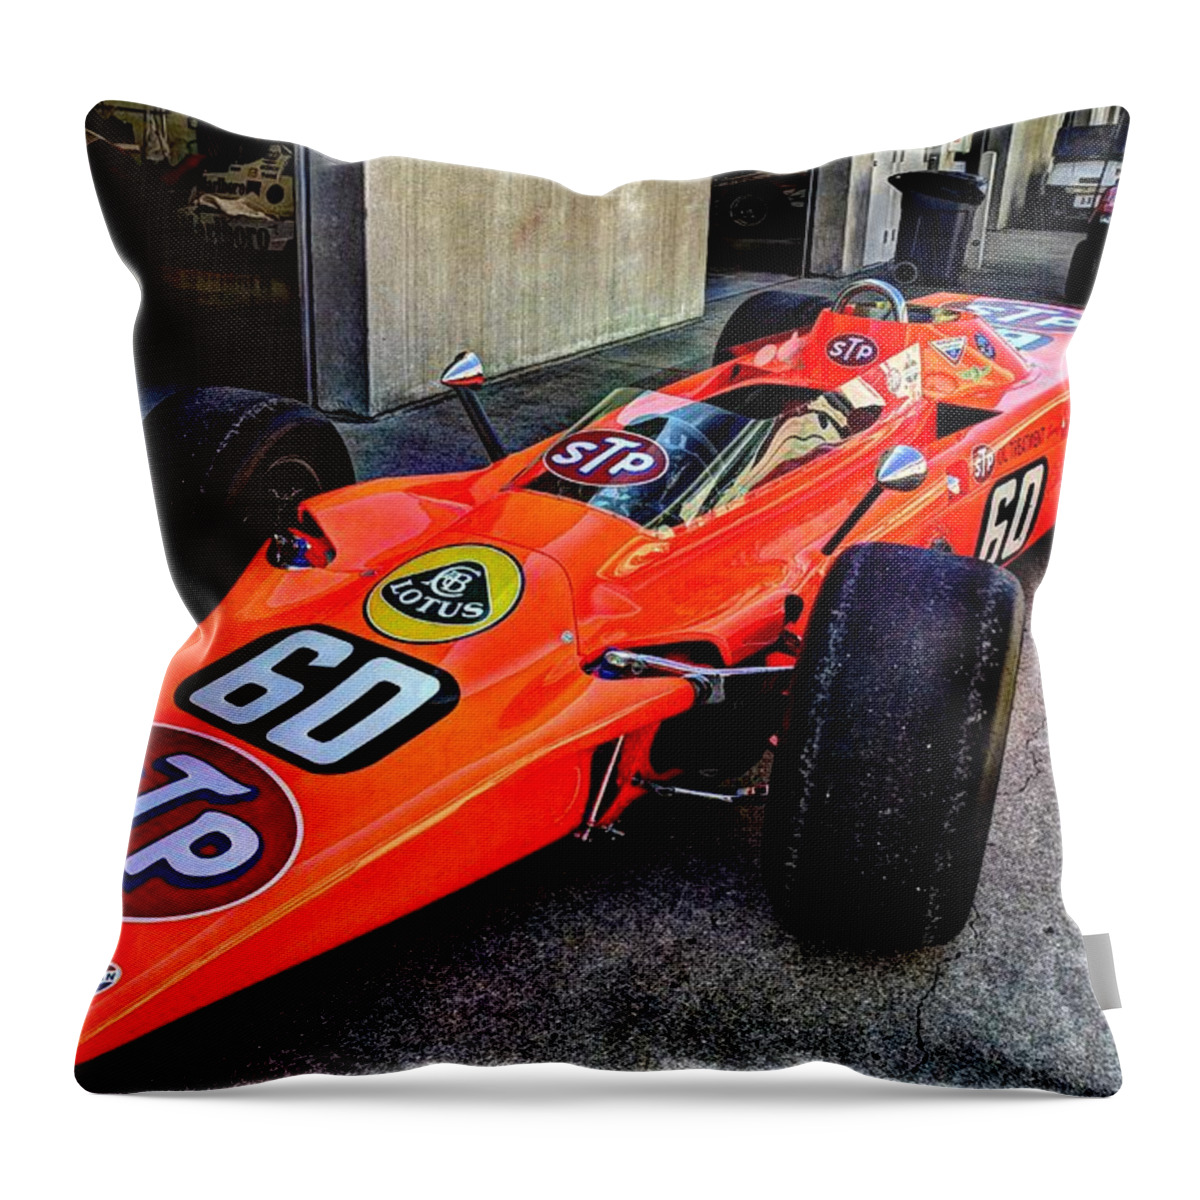 Josh Williams Photography Throw Pillow featuring the photograph 1968 Lotus 56 Turbine Indy Car #60 angle by Josh Williams